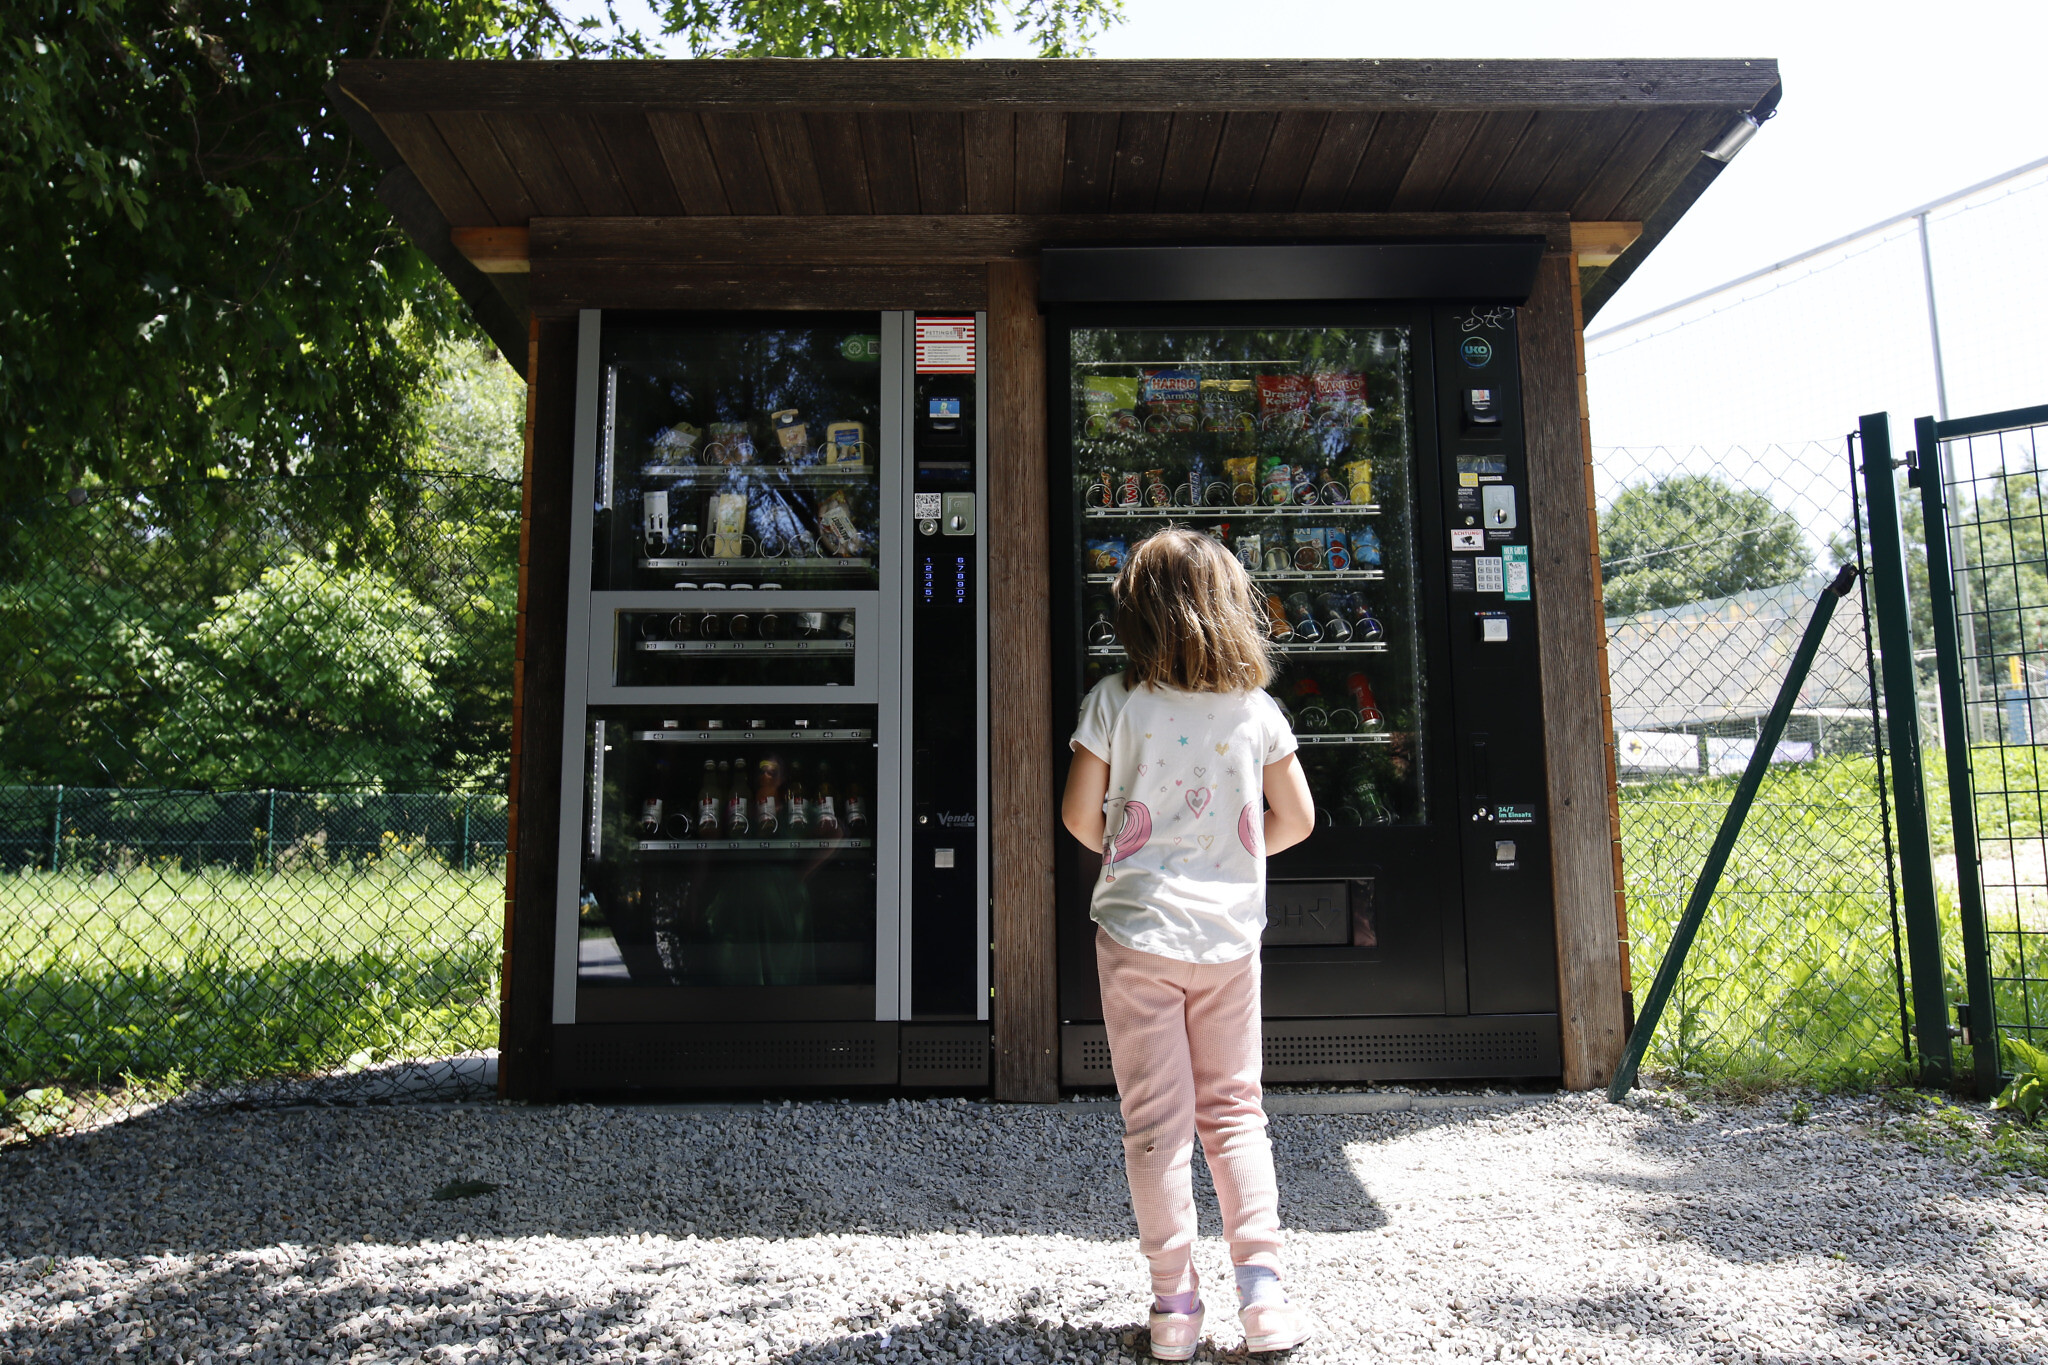 Lily, daughter of Amy Feineman, stops at a vending machine on her way home from school in Graz, Austria, on June 27, 2022. The refrigerated vending machine on the left offers items such as sausage, cheese, eggs and drinks from local businesses. (Raquel G. Frohlich)